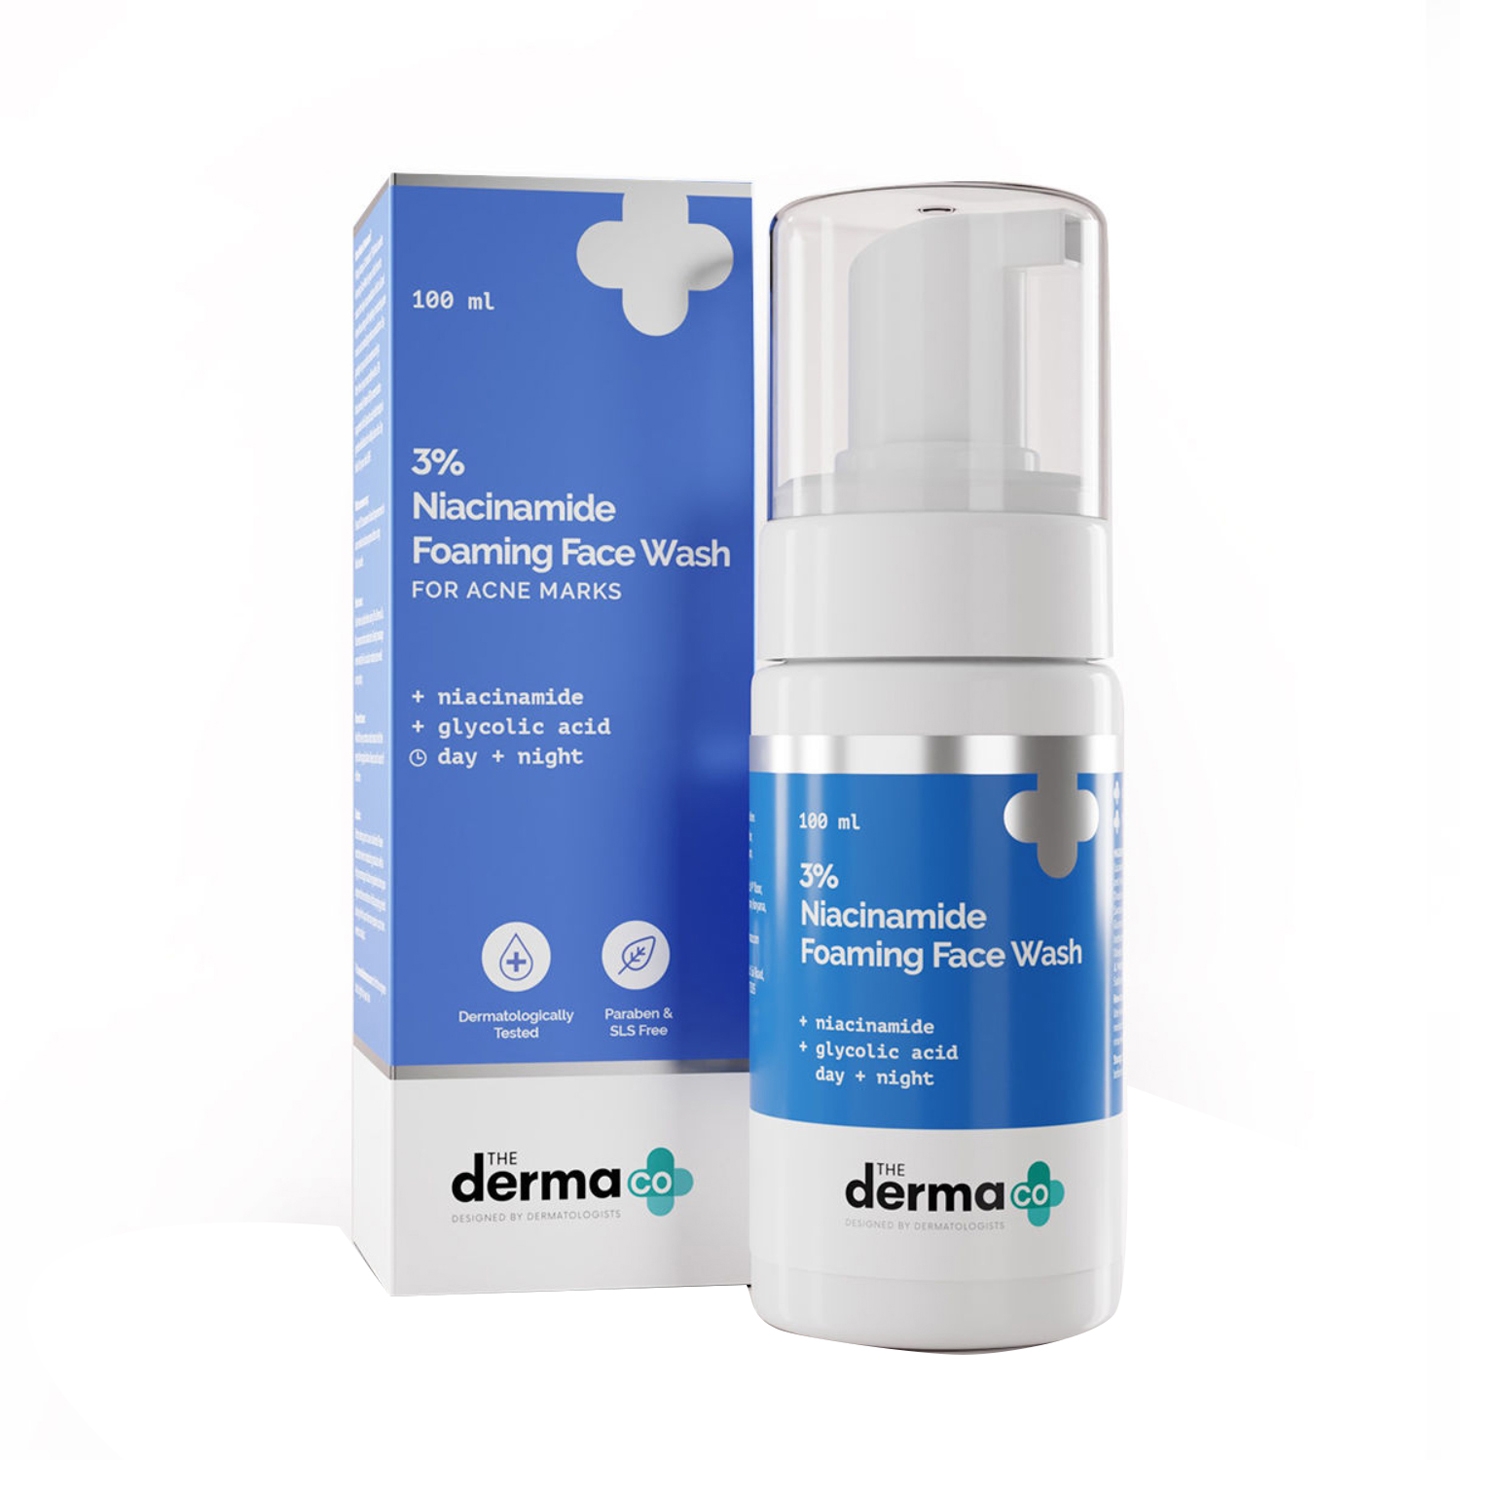 The Derma Co | The Derma Co 3% Niacinamide Foaming Daily Face Wash (100ml)